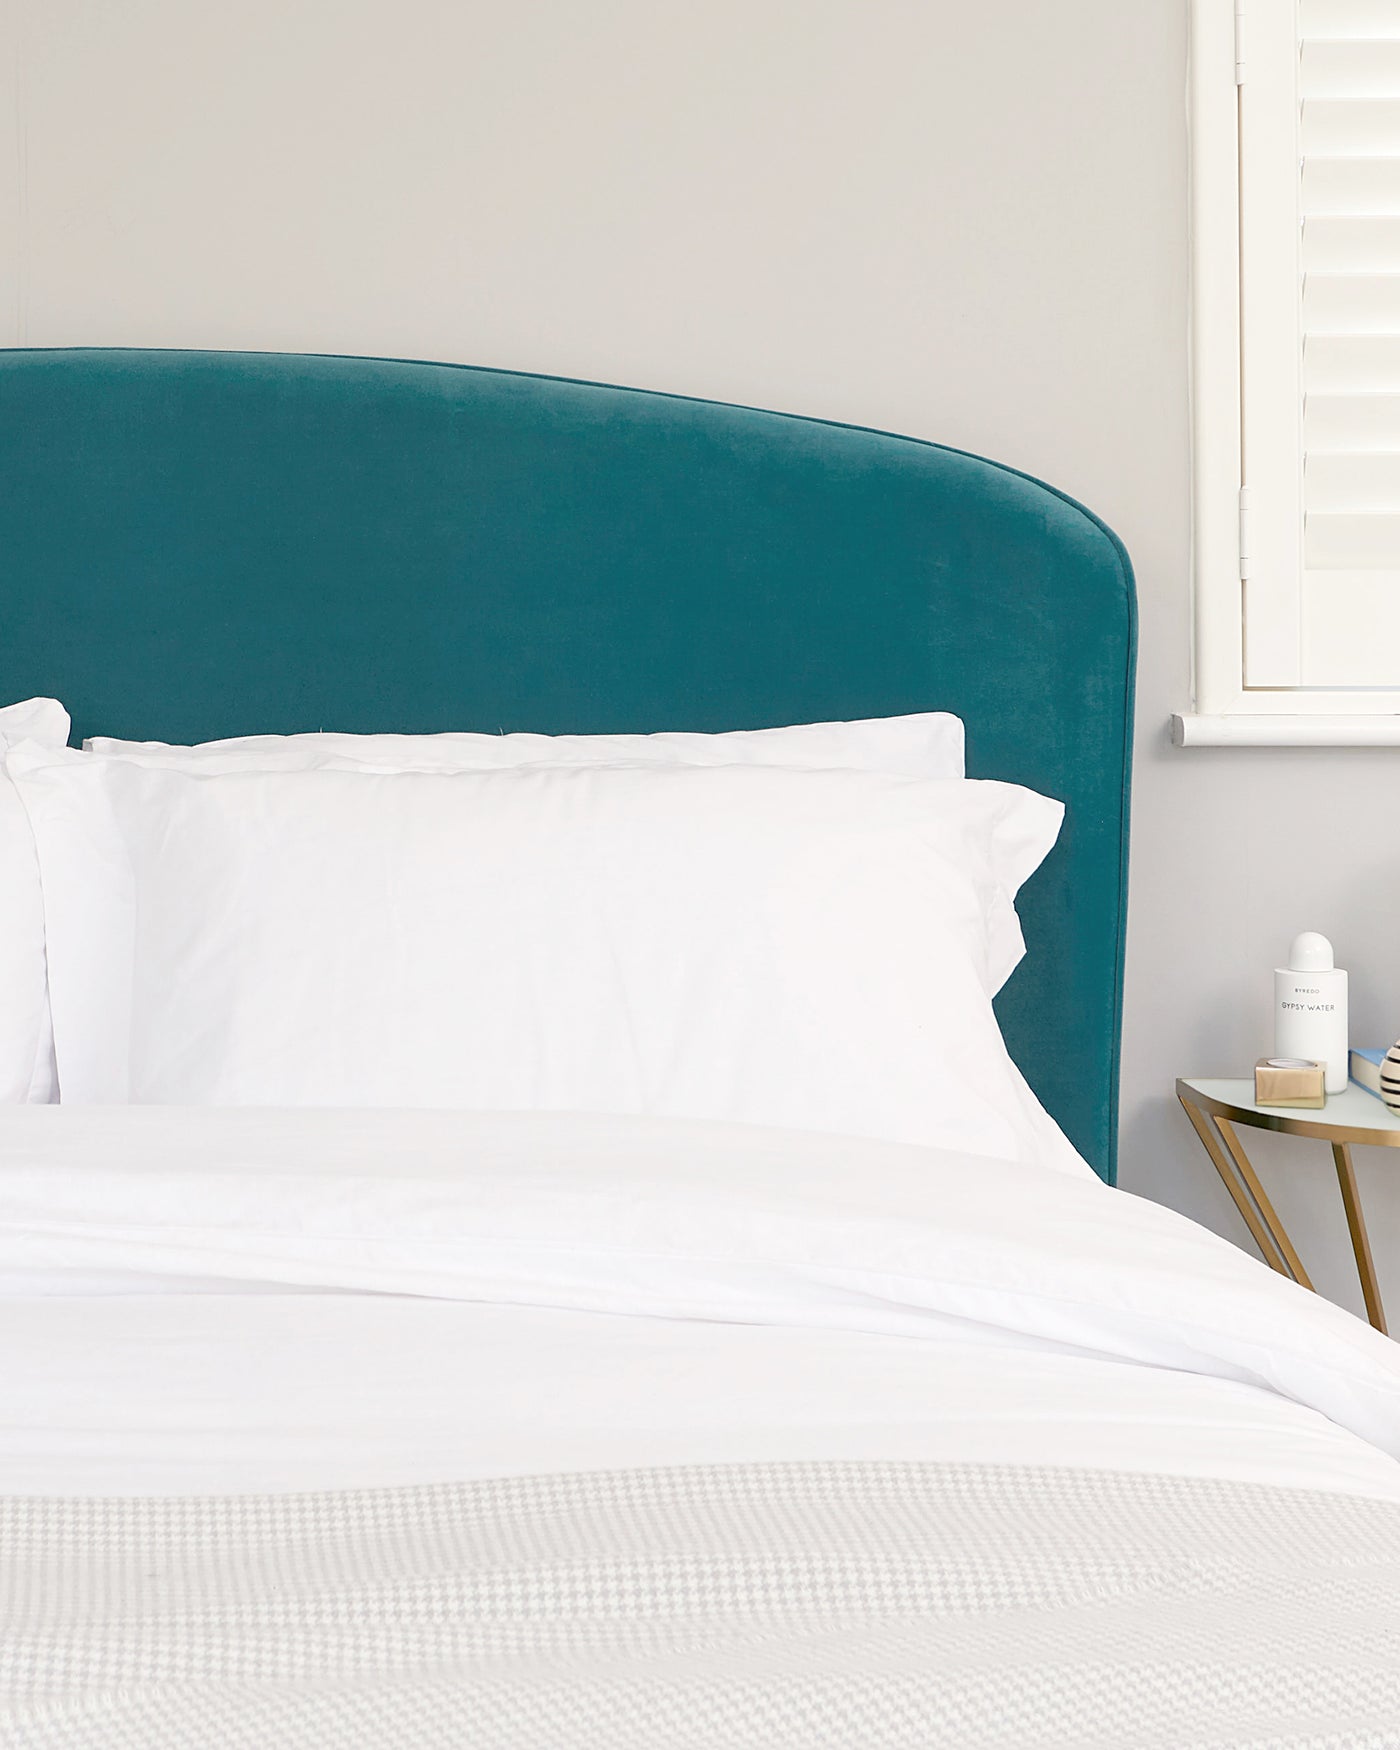 Elegant teal velvet upholstered headboard with a smooth curved top, paired with a clean white bedding set on a minimalist bed frame, adjacent to a simple wooden side table with a round top and triangular base.